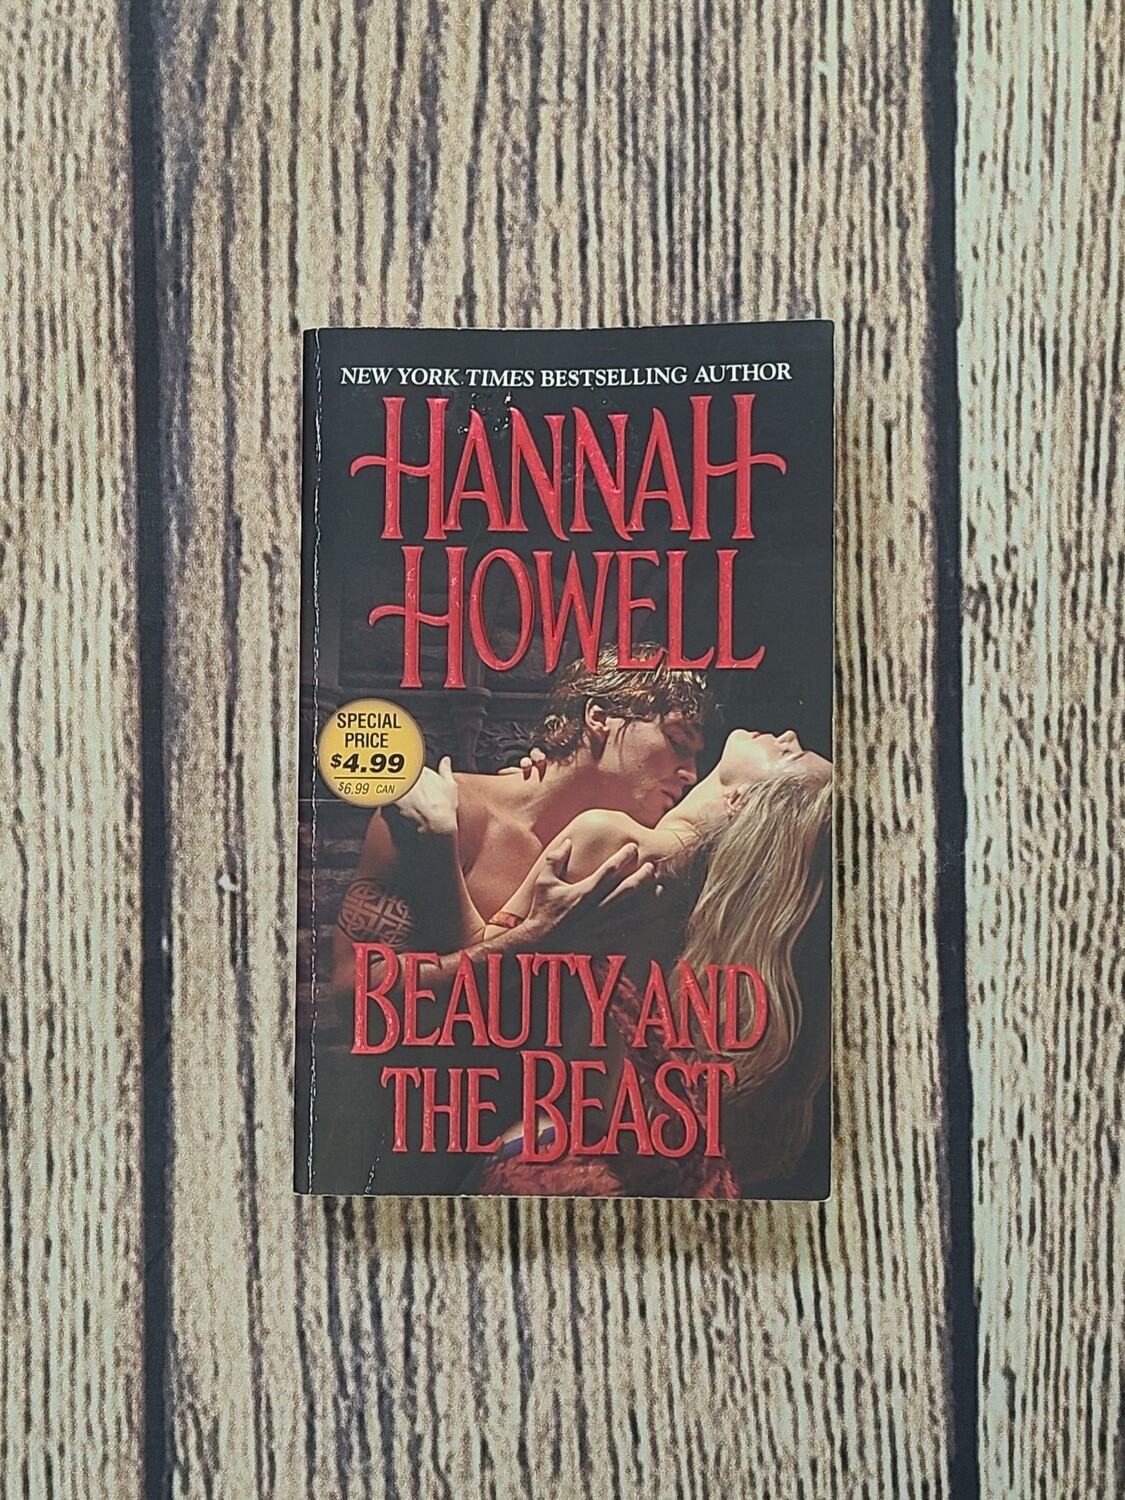 Beauty and The Beast by Hannah Howell